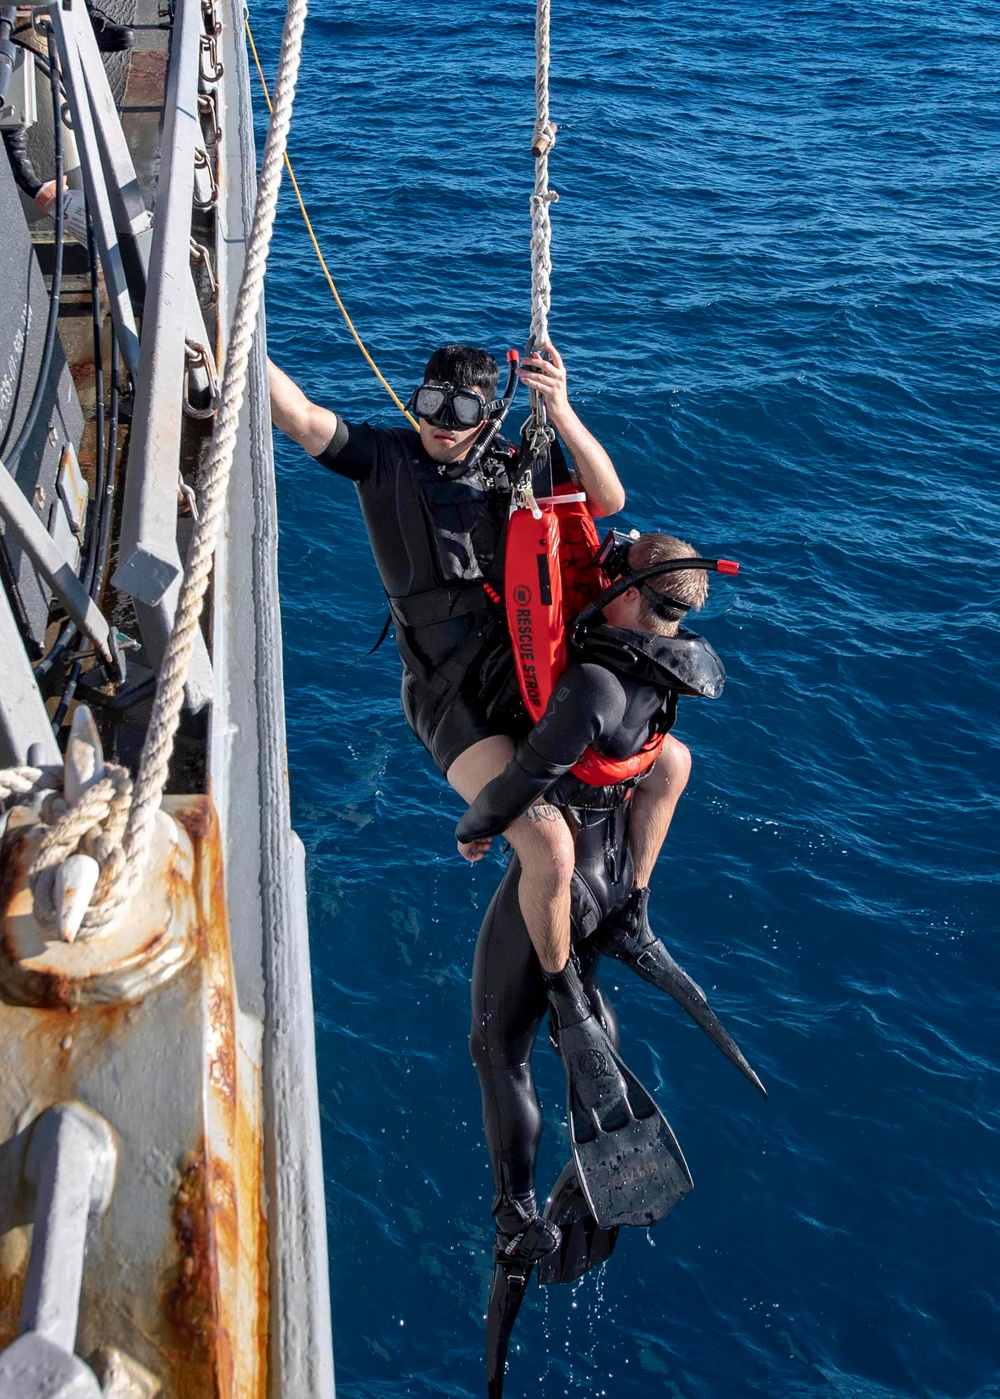 USS McCampbell Conducts Rescue Swimmer Training During Talisman Sabre 2019